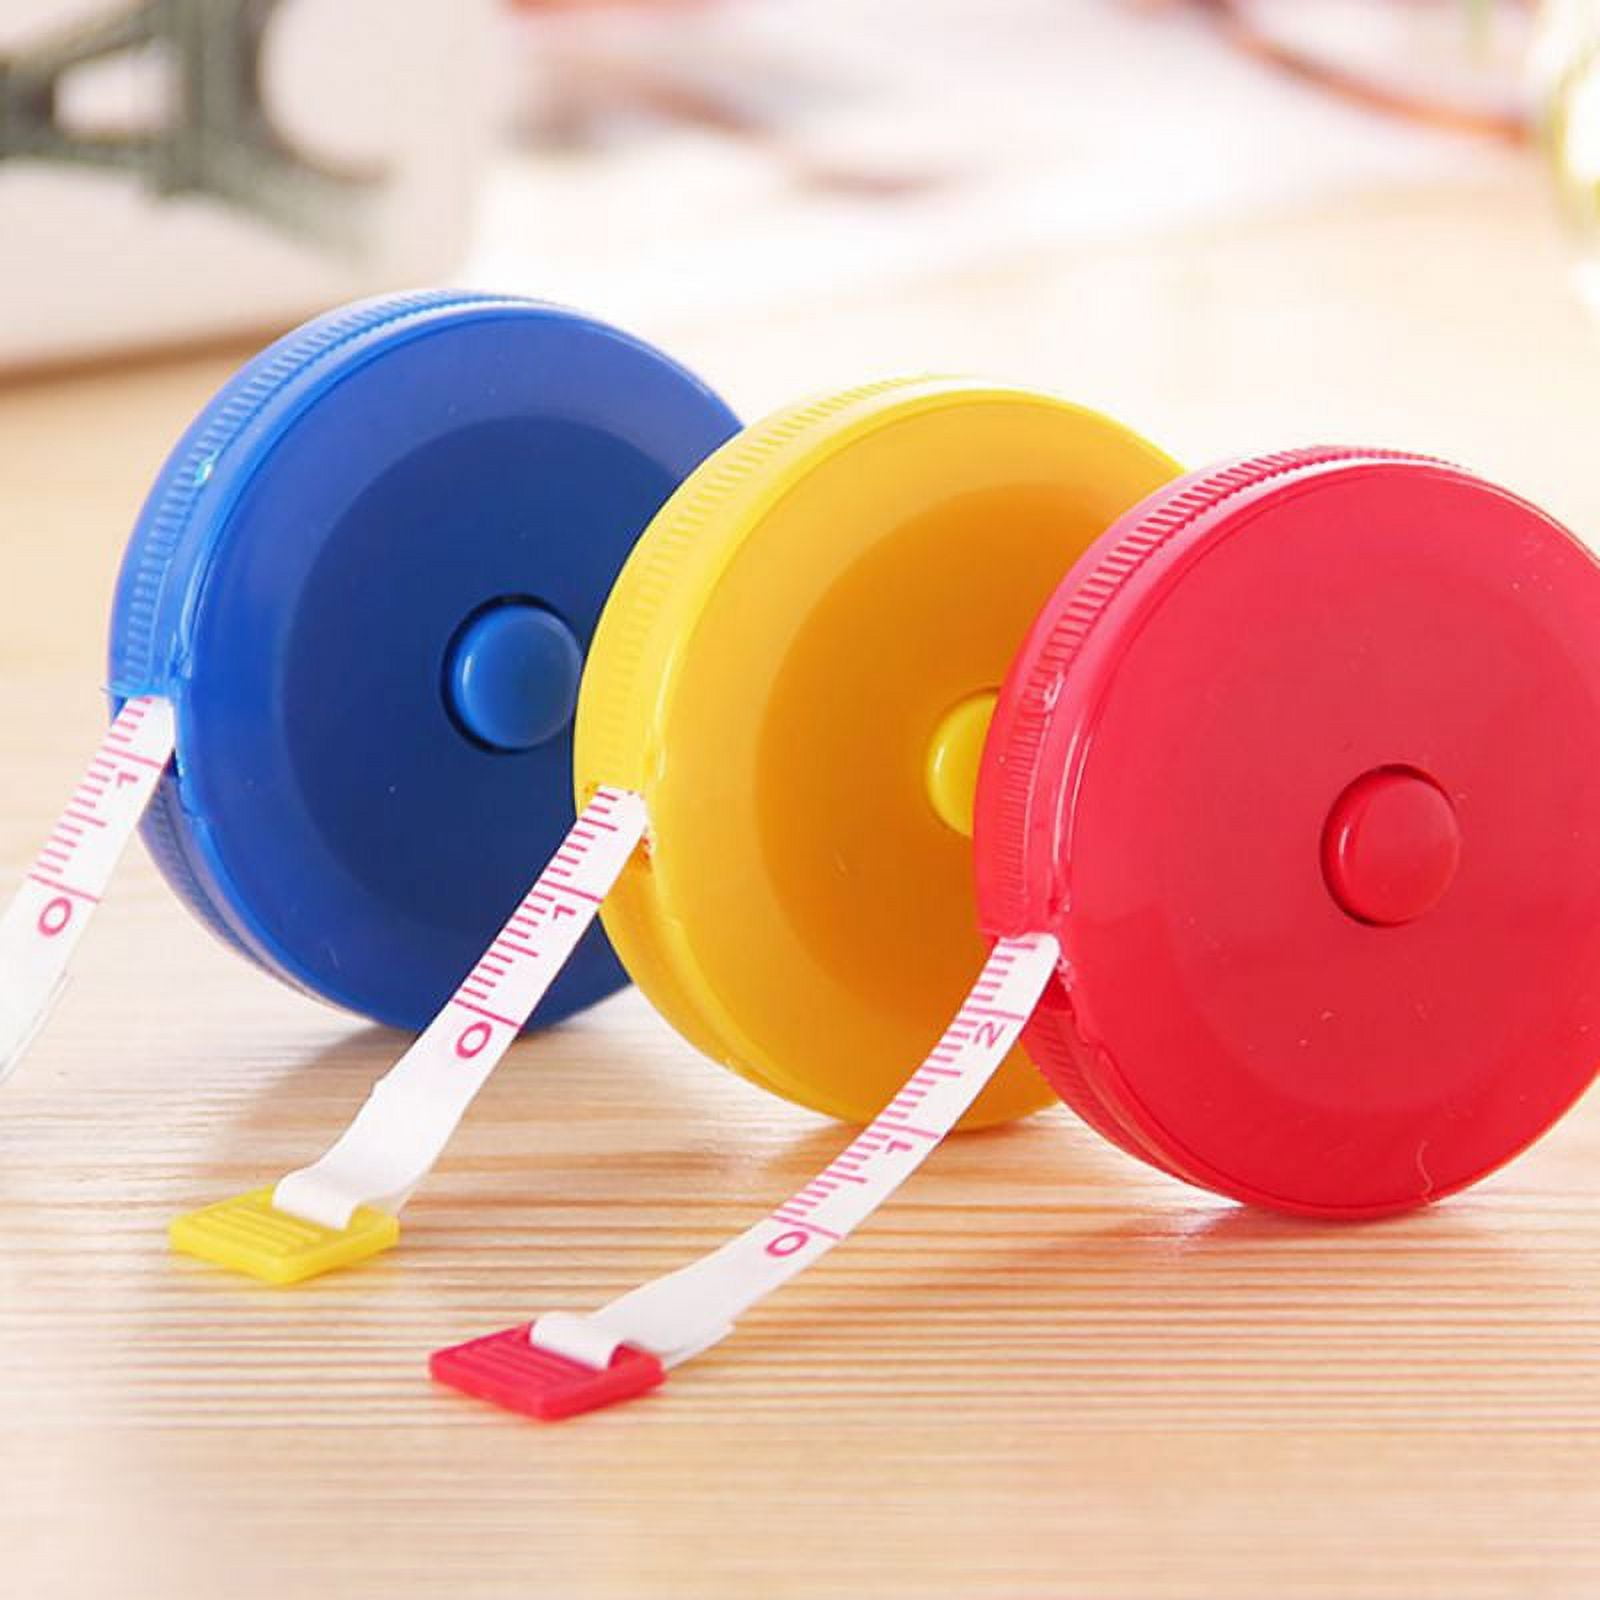 60-Inch 1.5 Meter Soft Retractable Measuring Tape, Pocket, Body Tailor  Sewing Craft Cloth Tape Measure (Random Color) 